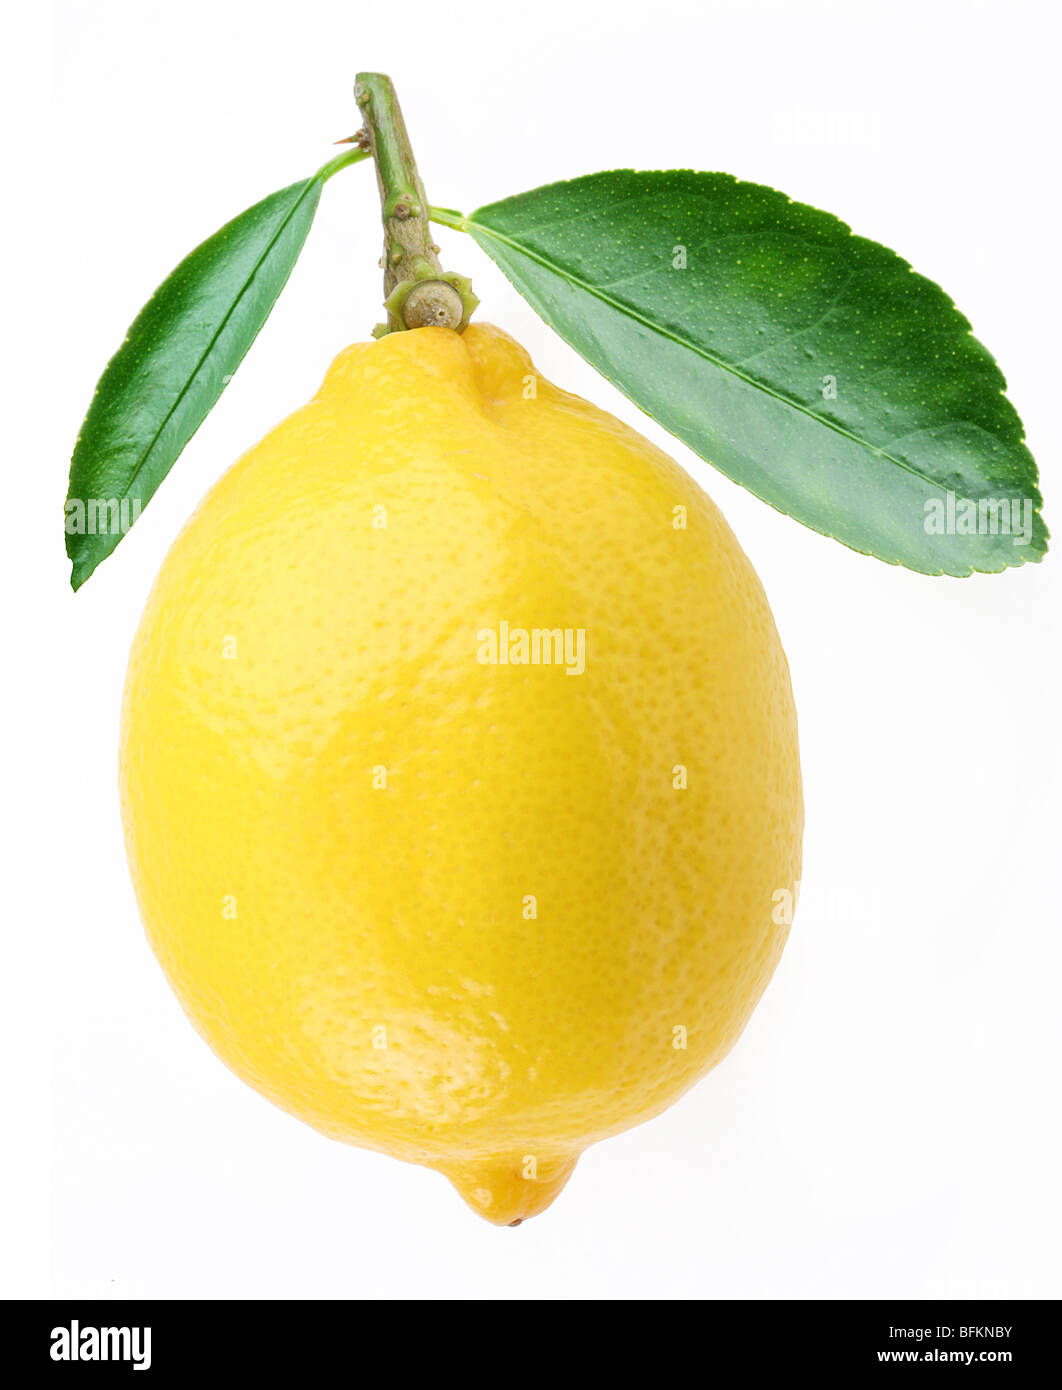 Lemon with leaves on a white background Stock Photo